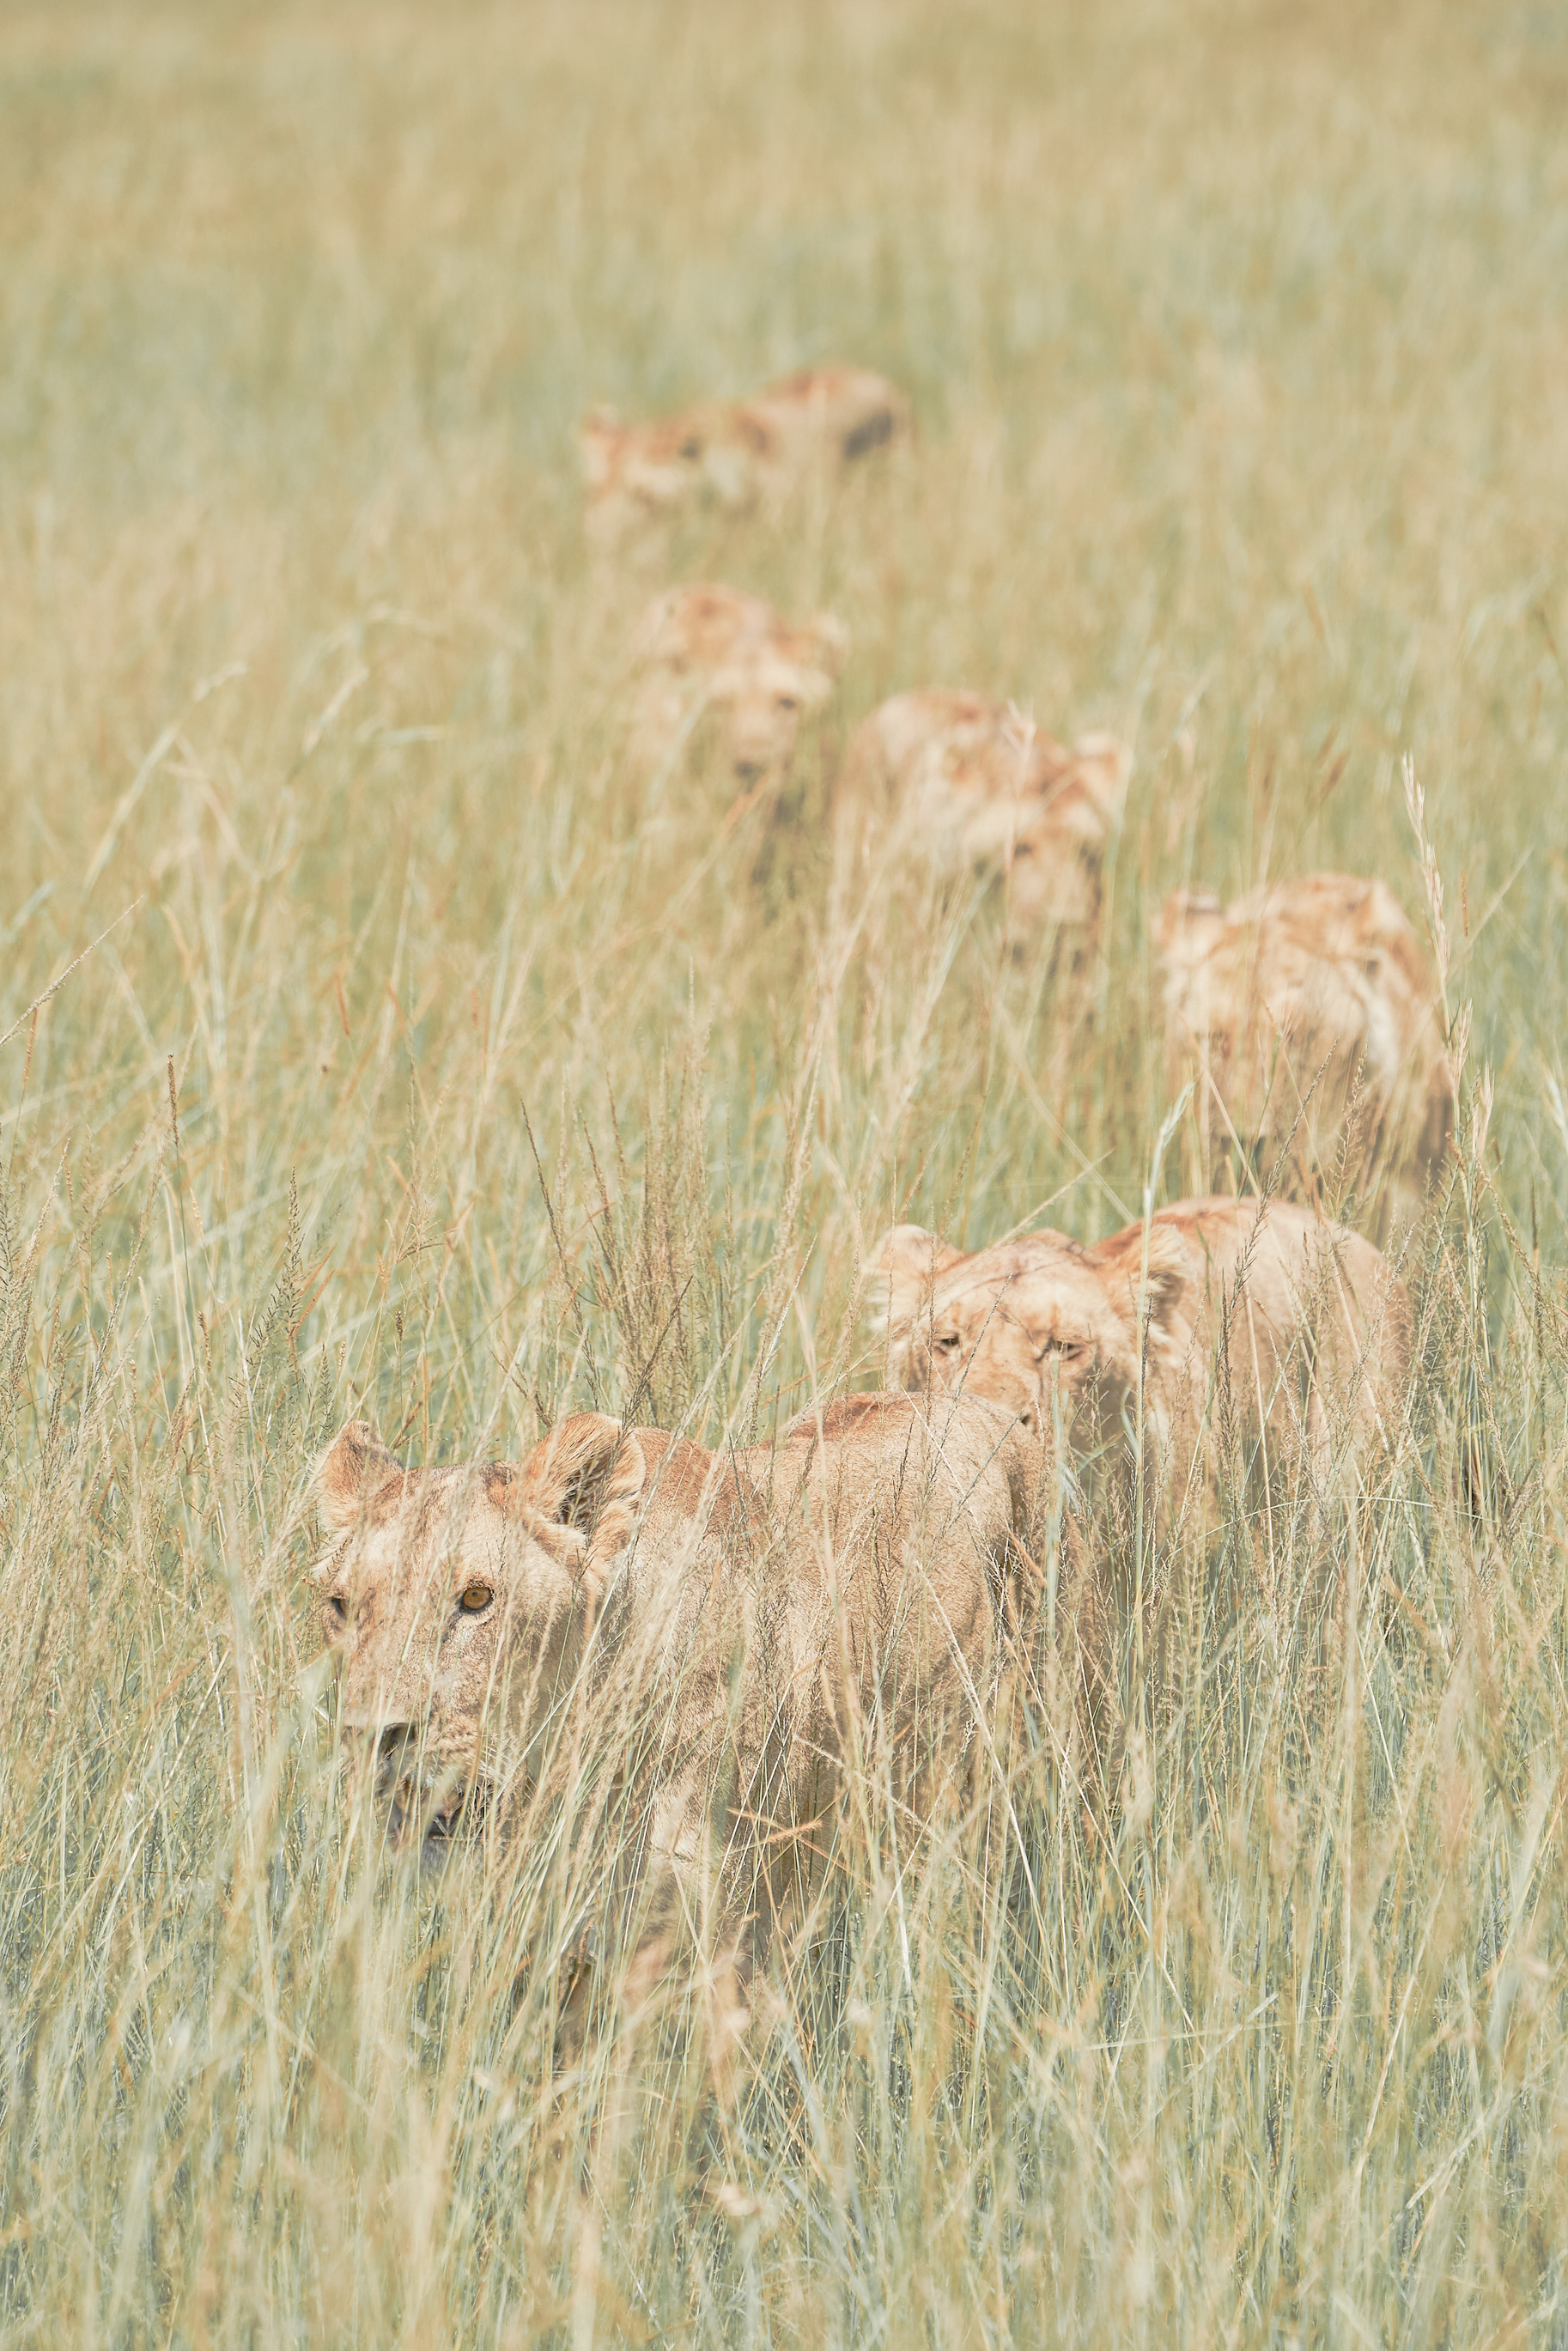 Lions in the savannah